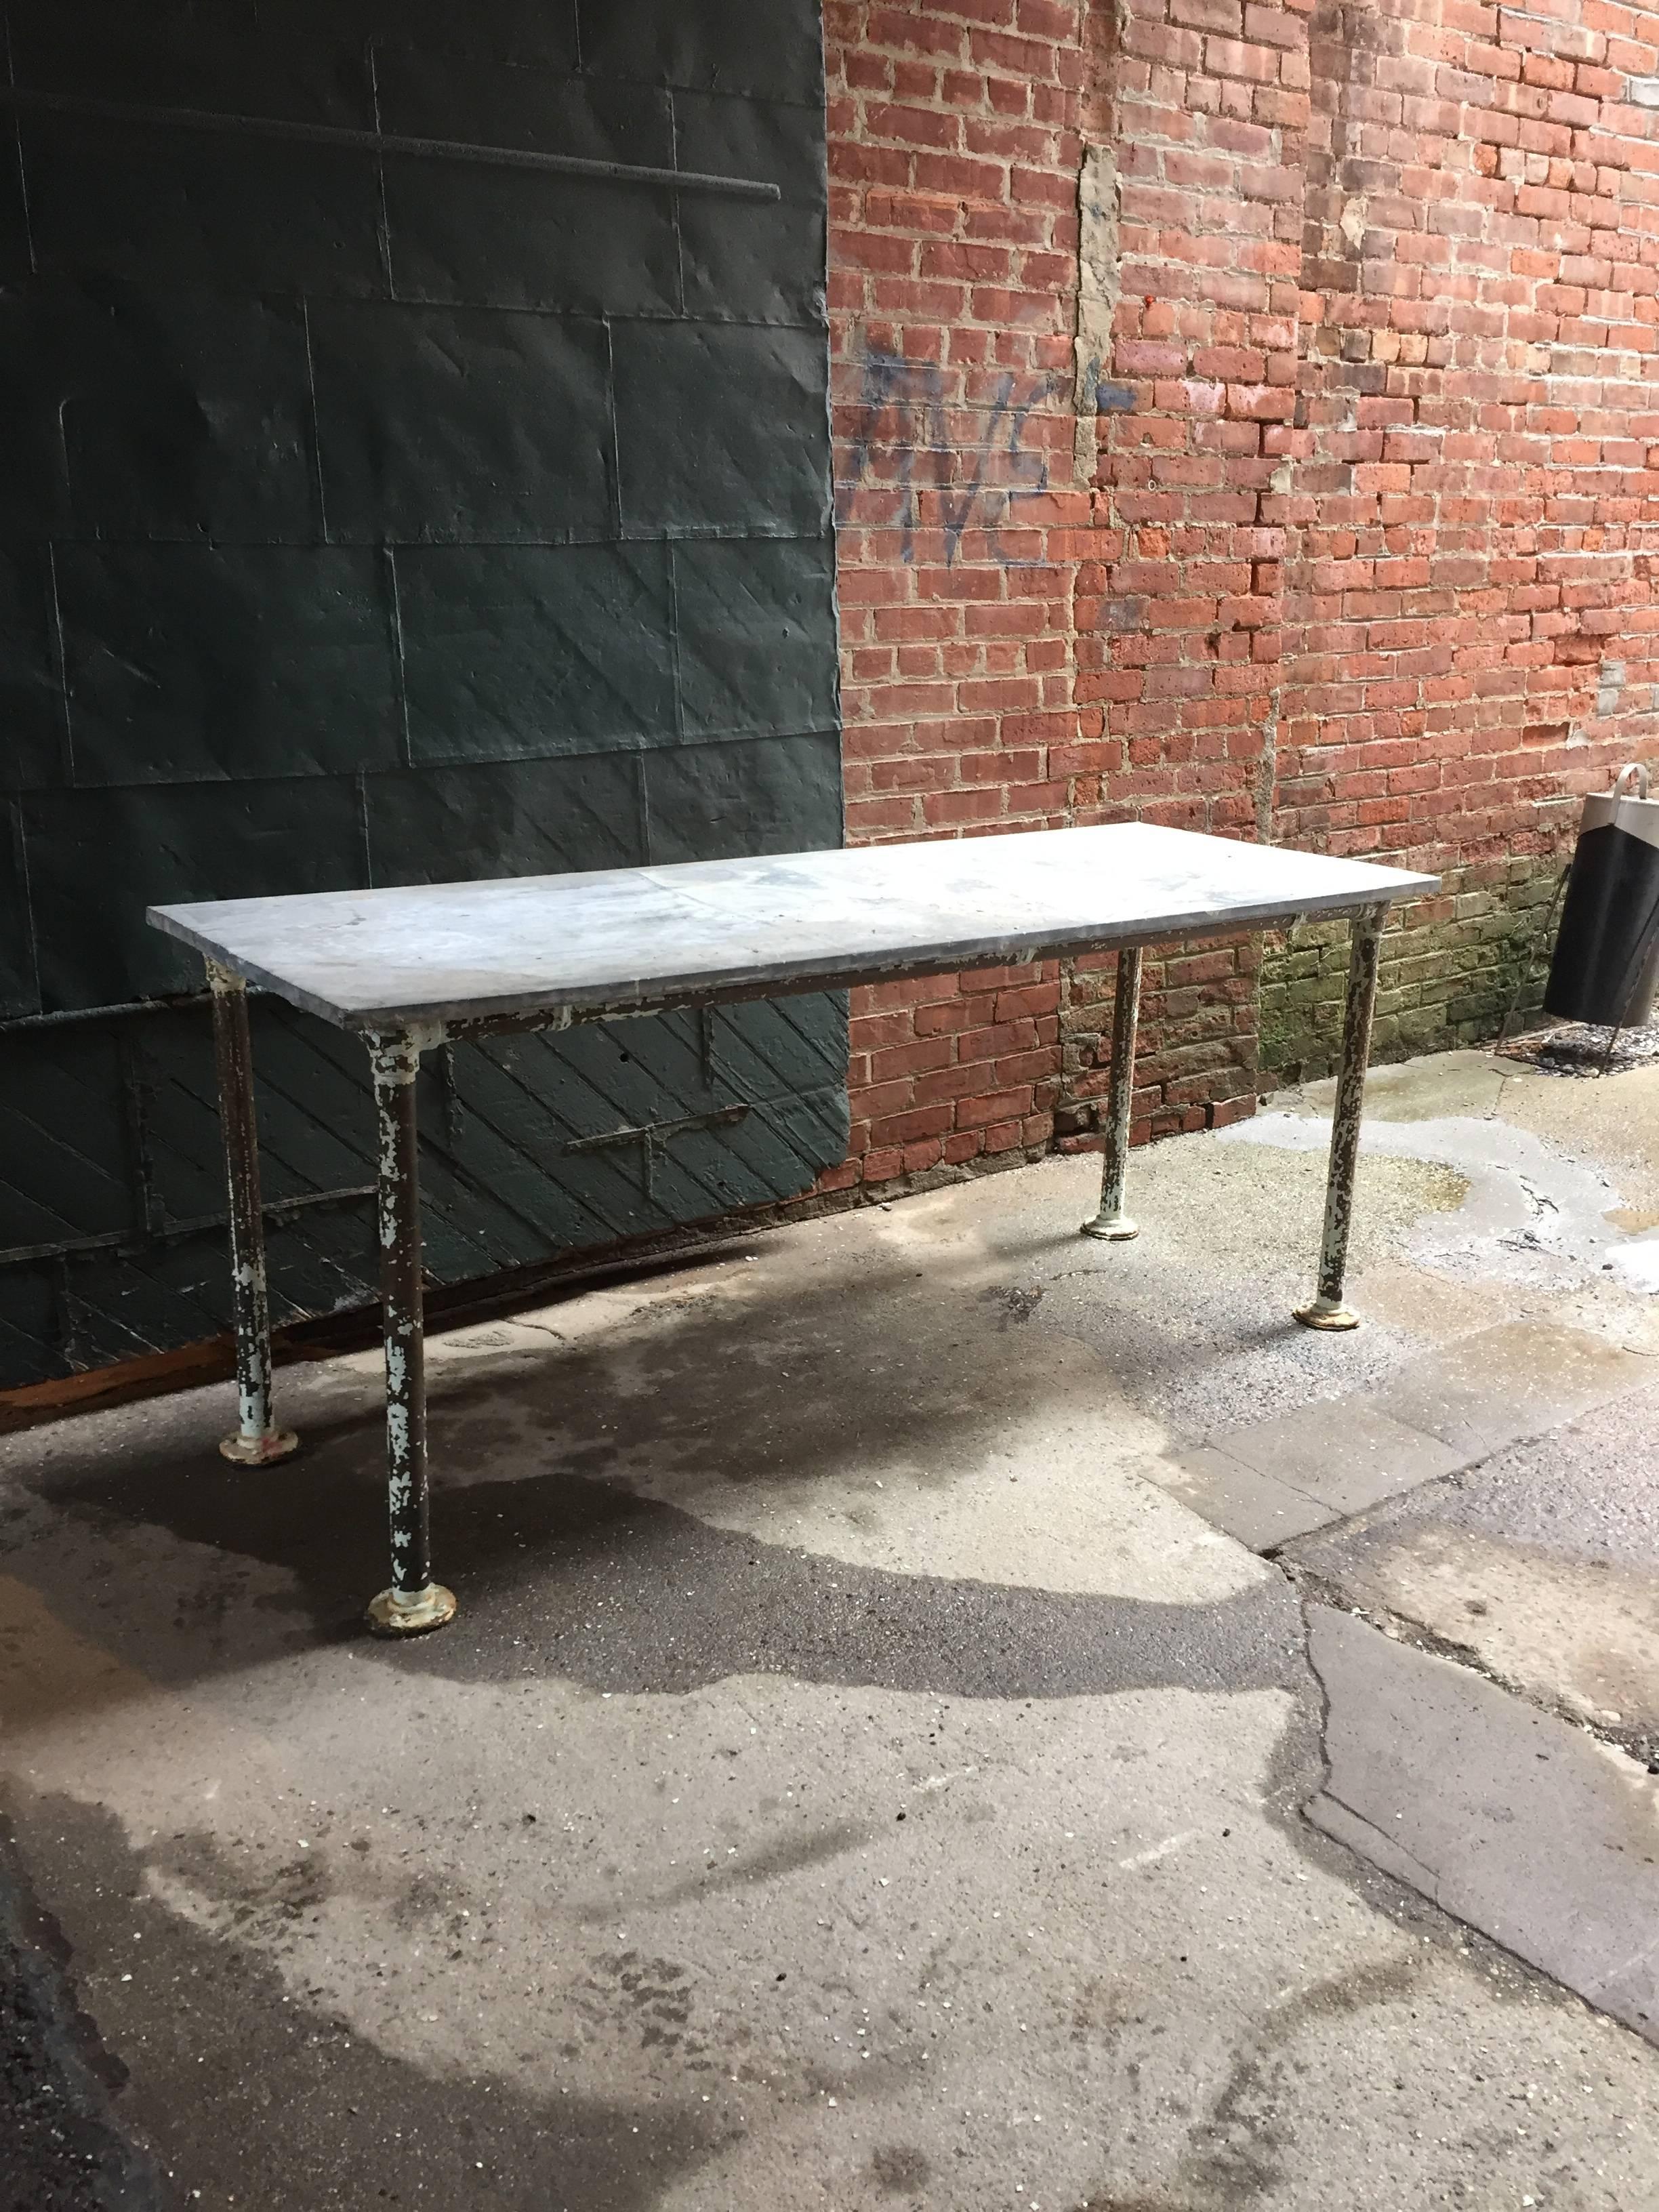 Straight out of the science lab. Constructed from galvanized zinc clad wood top with heavy duty steel pipe legs and frame. Well used as a work table; it has the proper amount of distress, wear, oxidation, use and surface paint loss. Remnants of